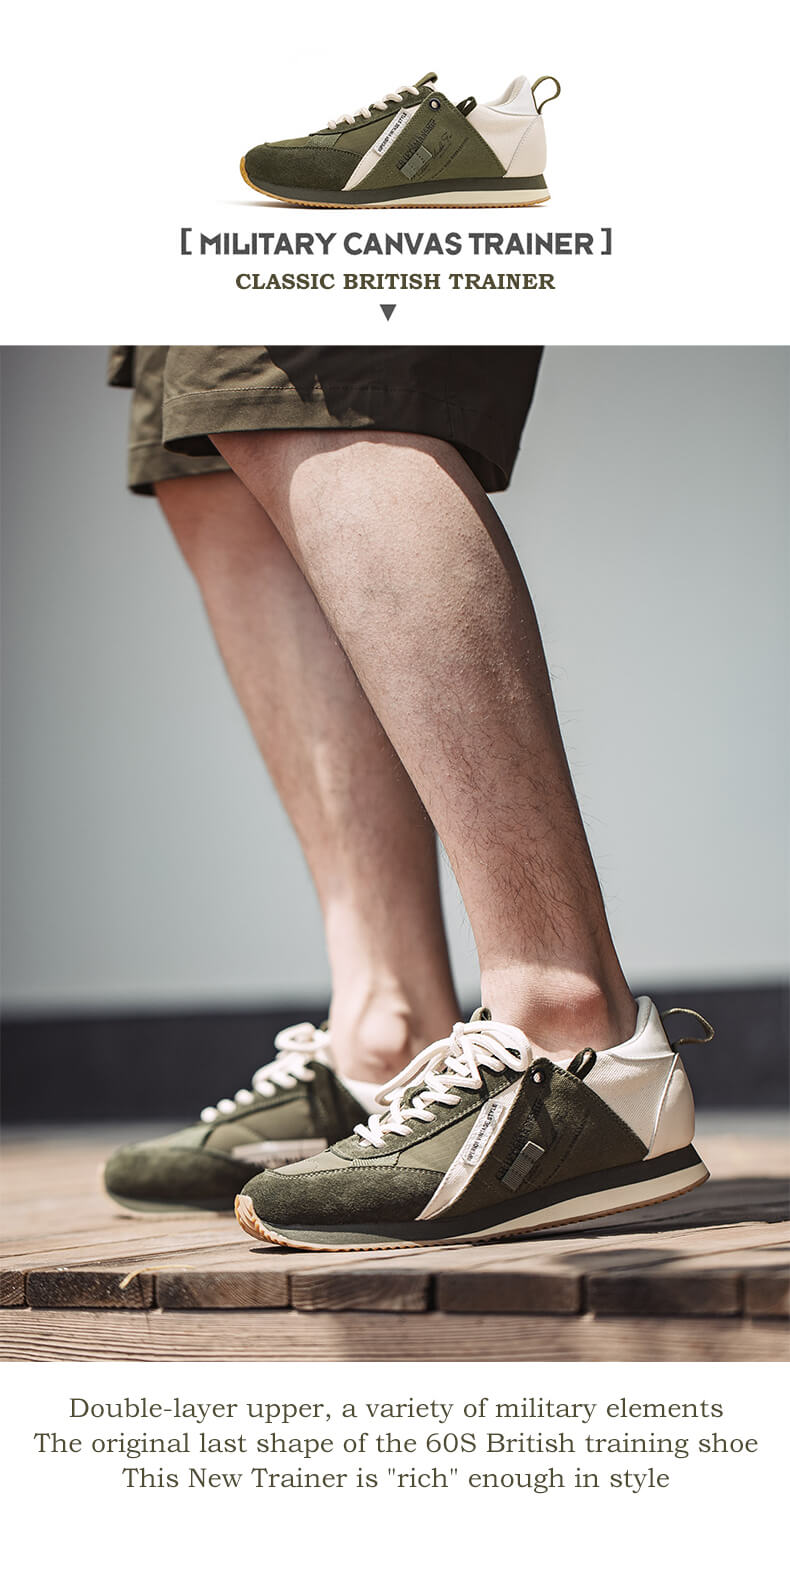 Military-inspired sneakers